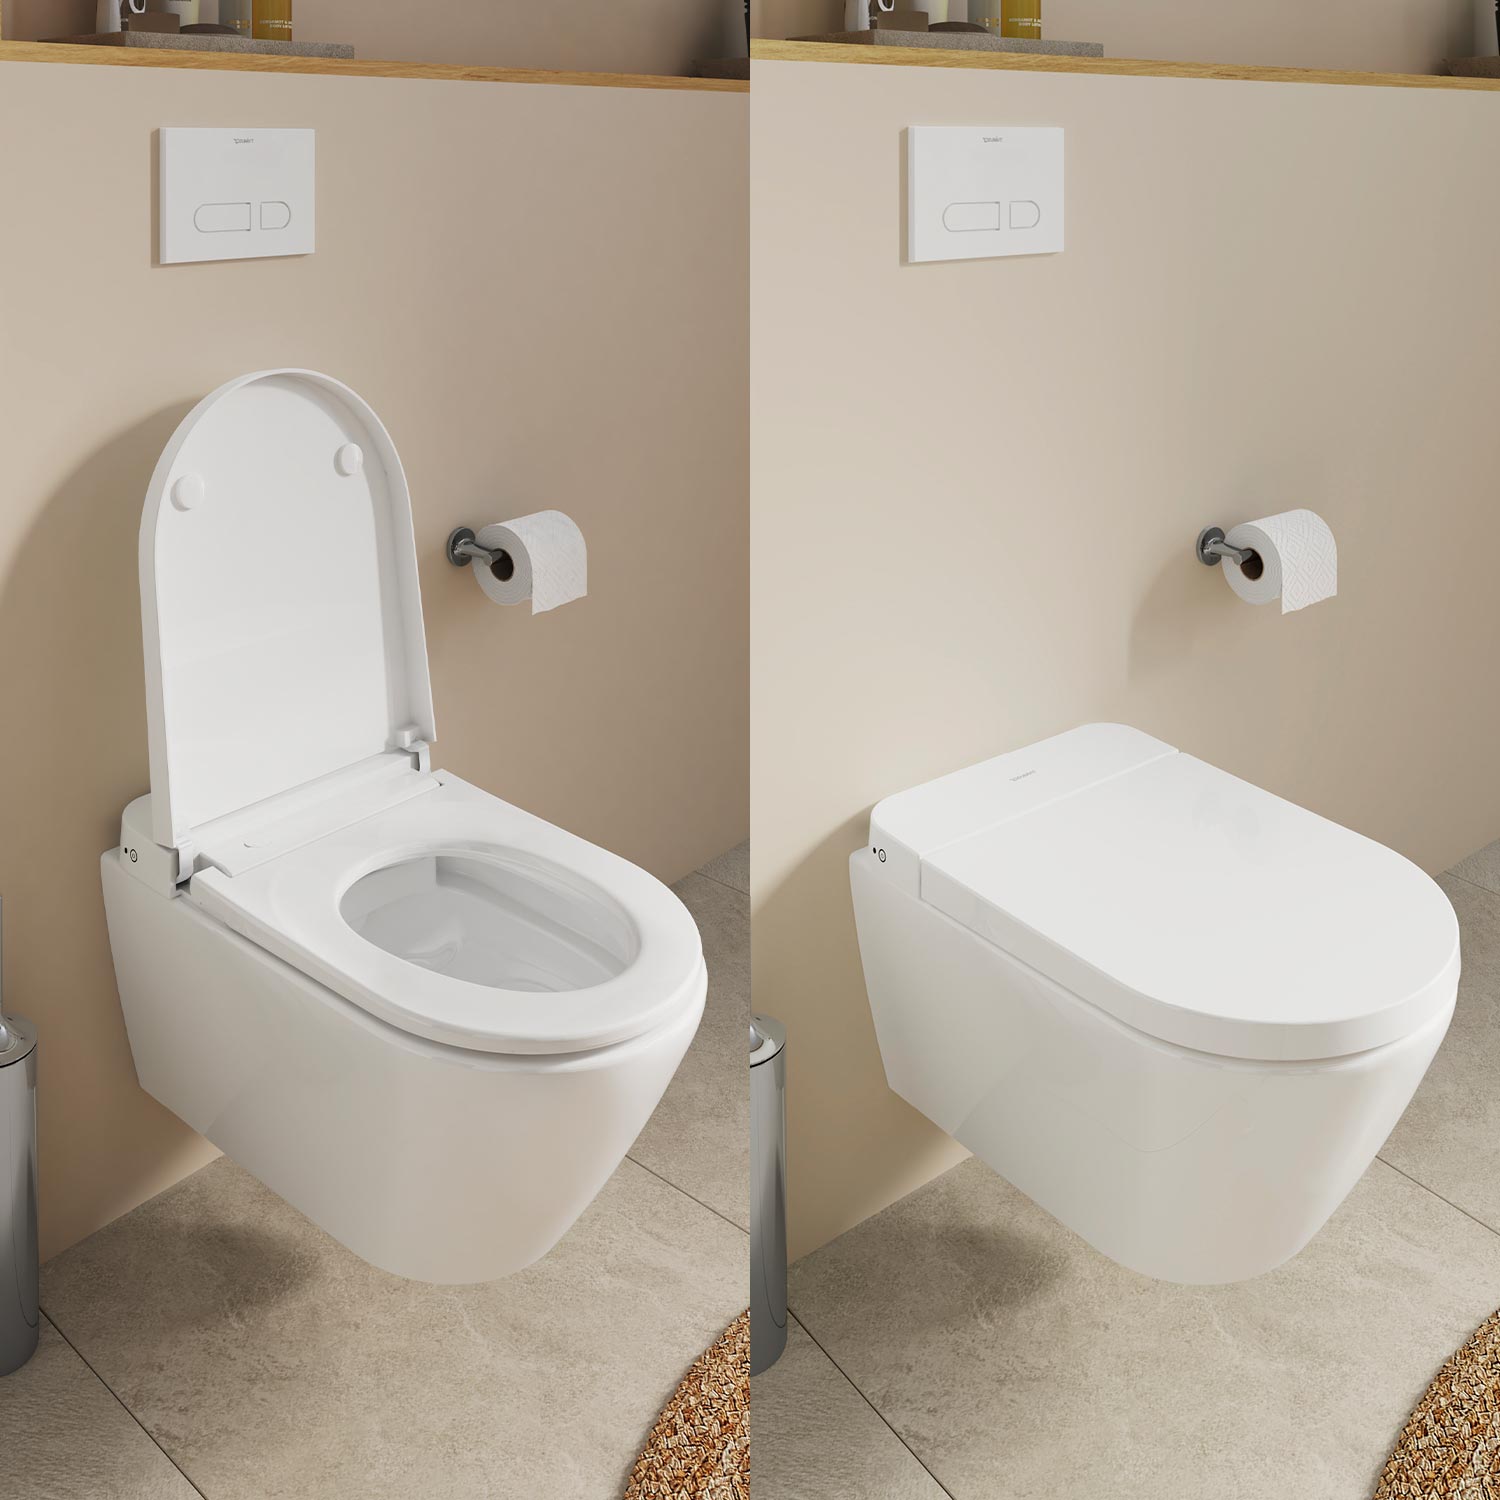 Toilet with Slow-close function
